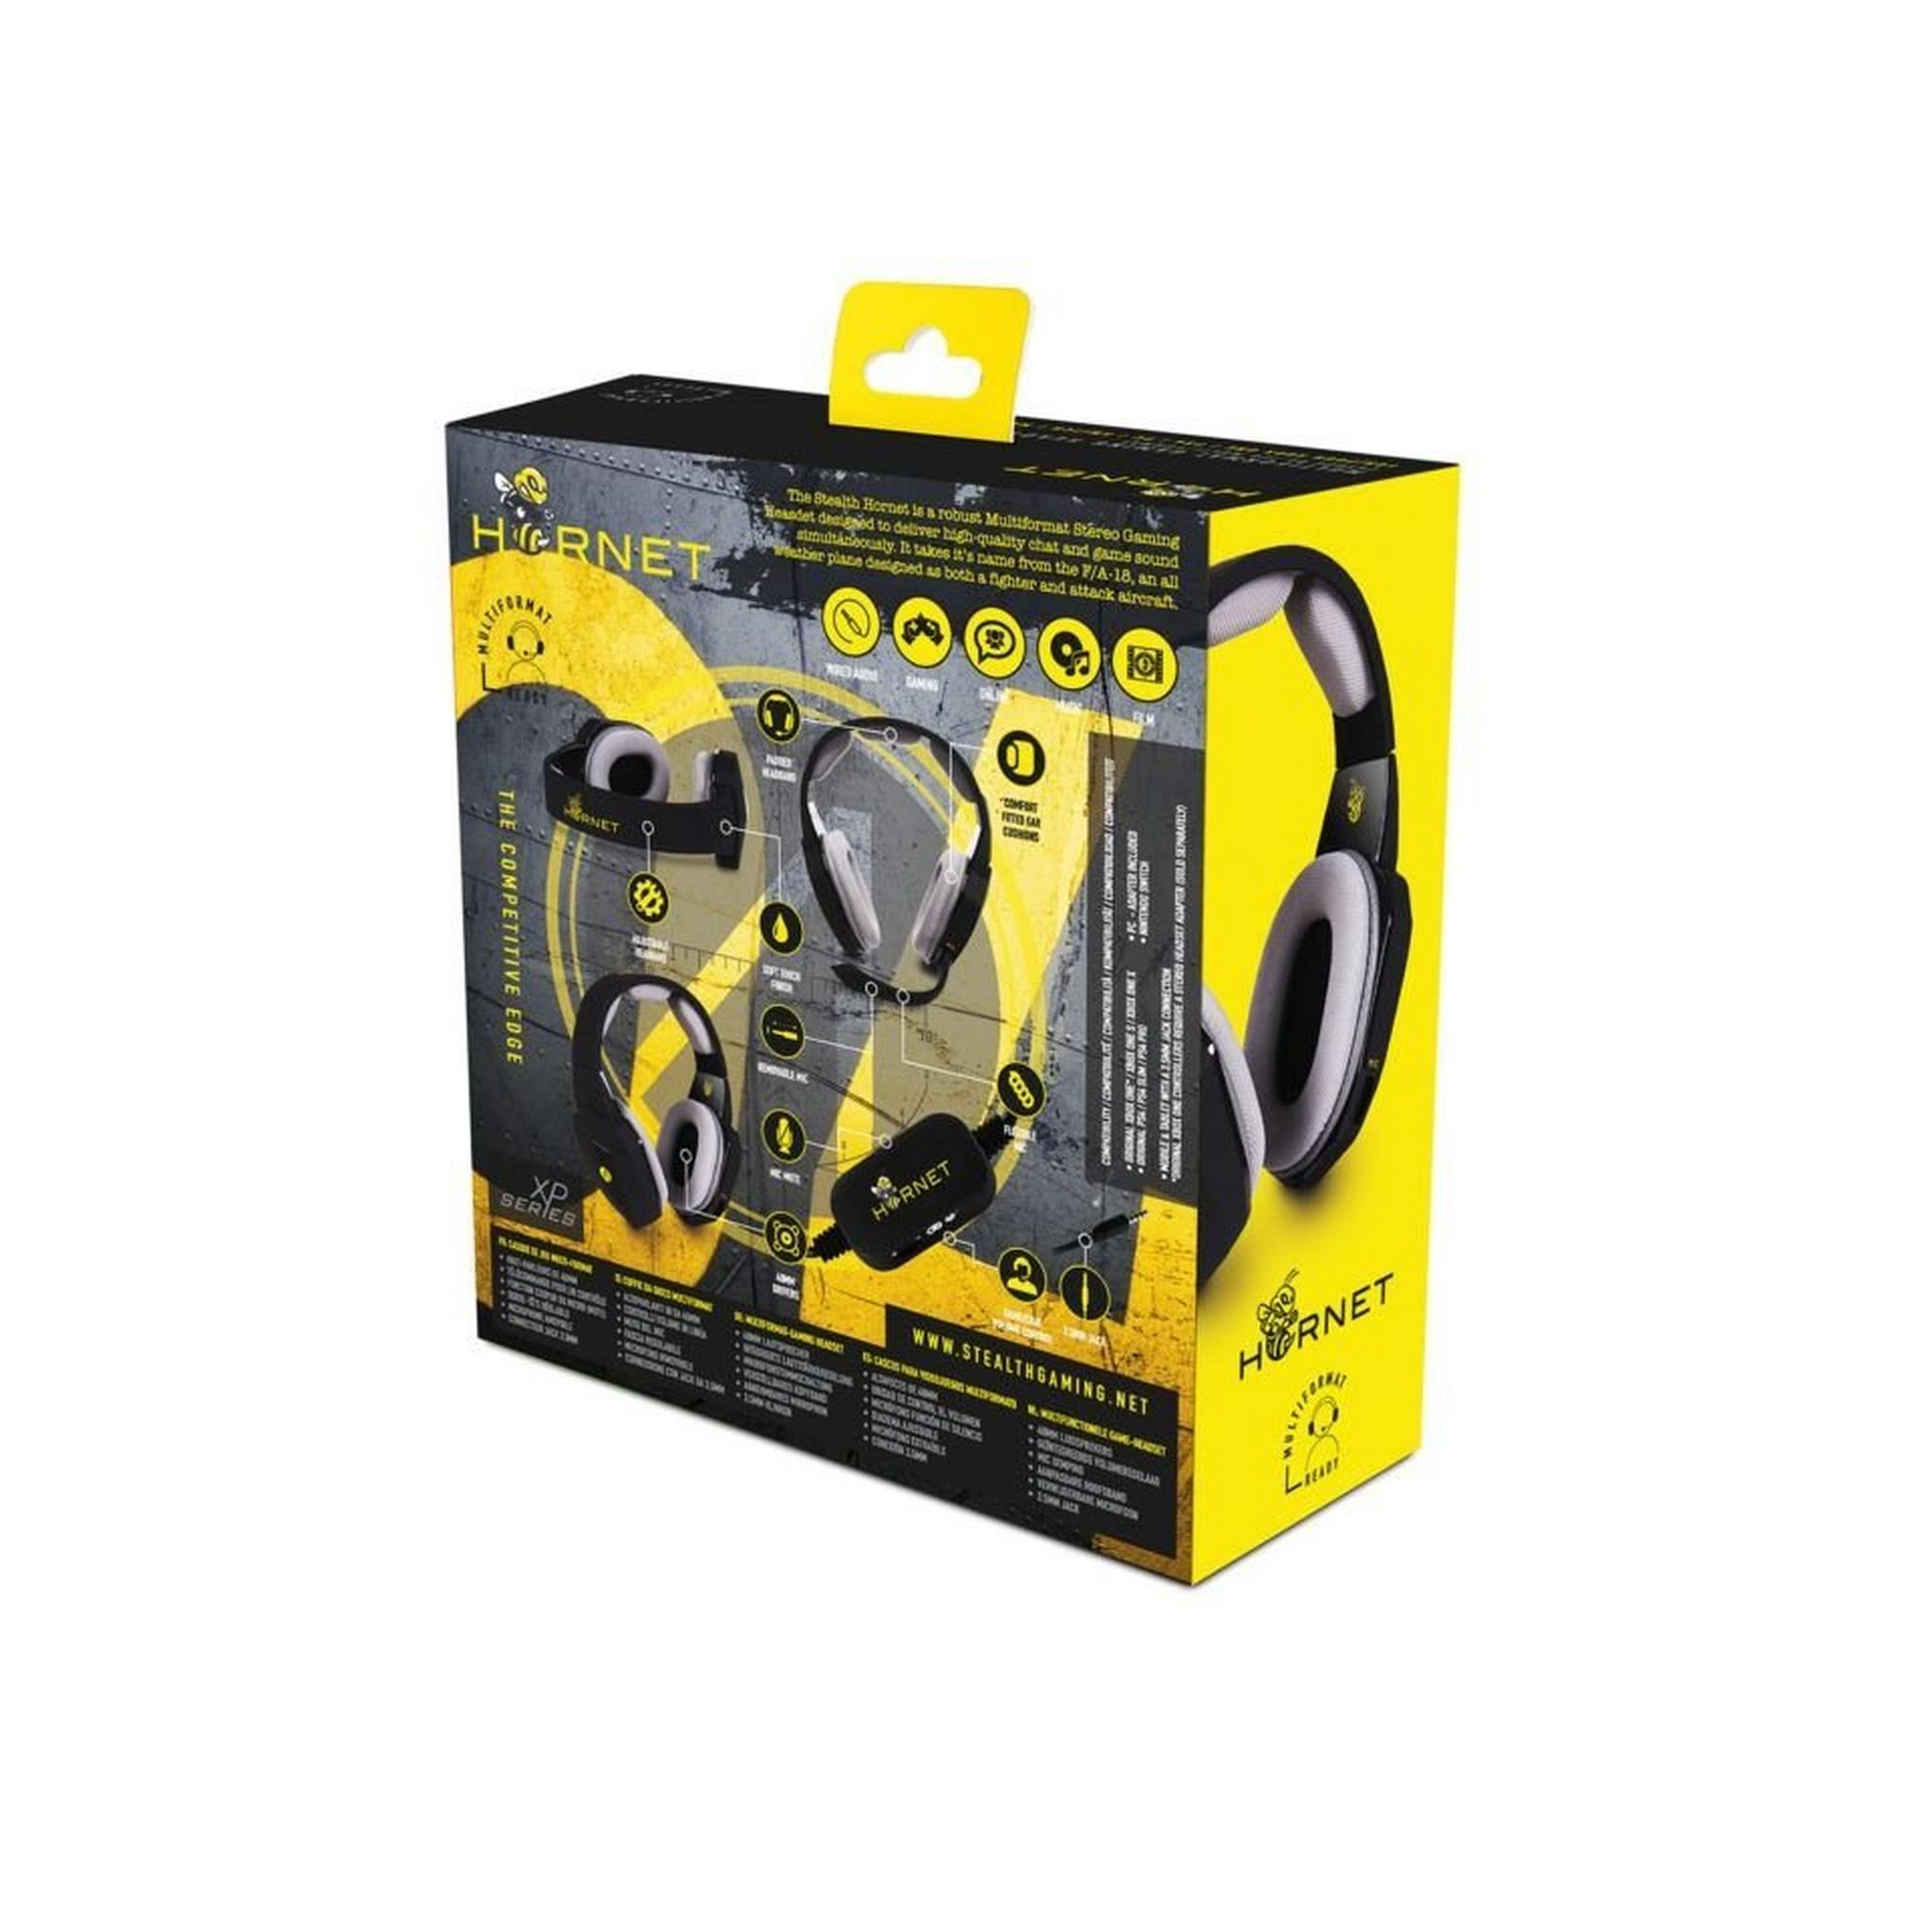 Stealth XP-Hornet Wired Gaming Headphone - Black